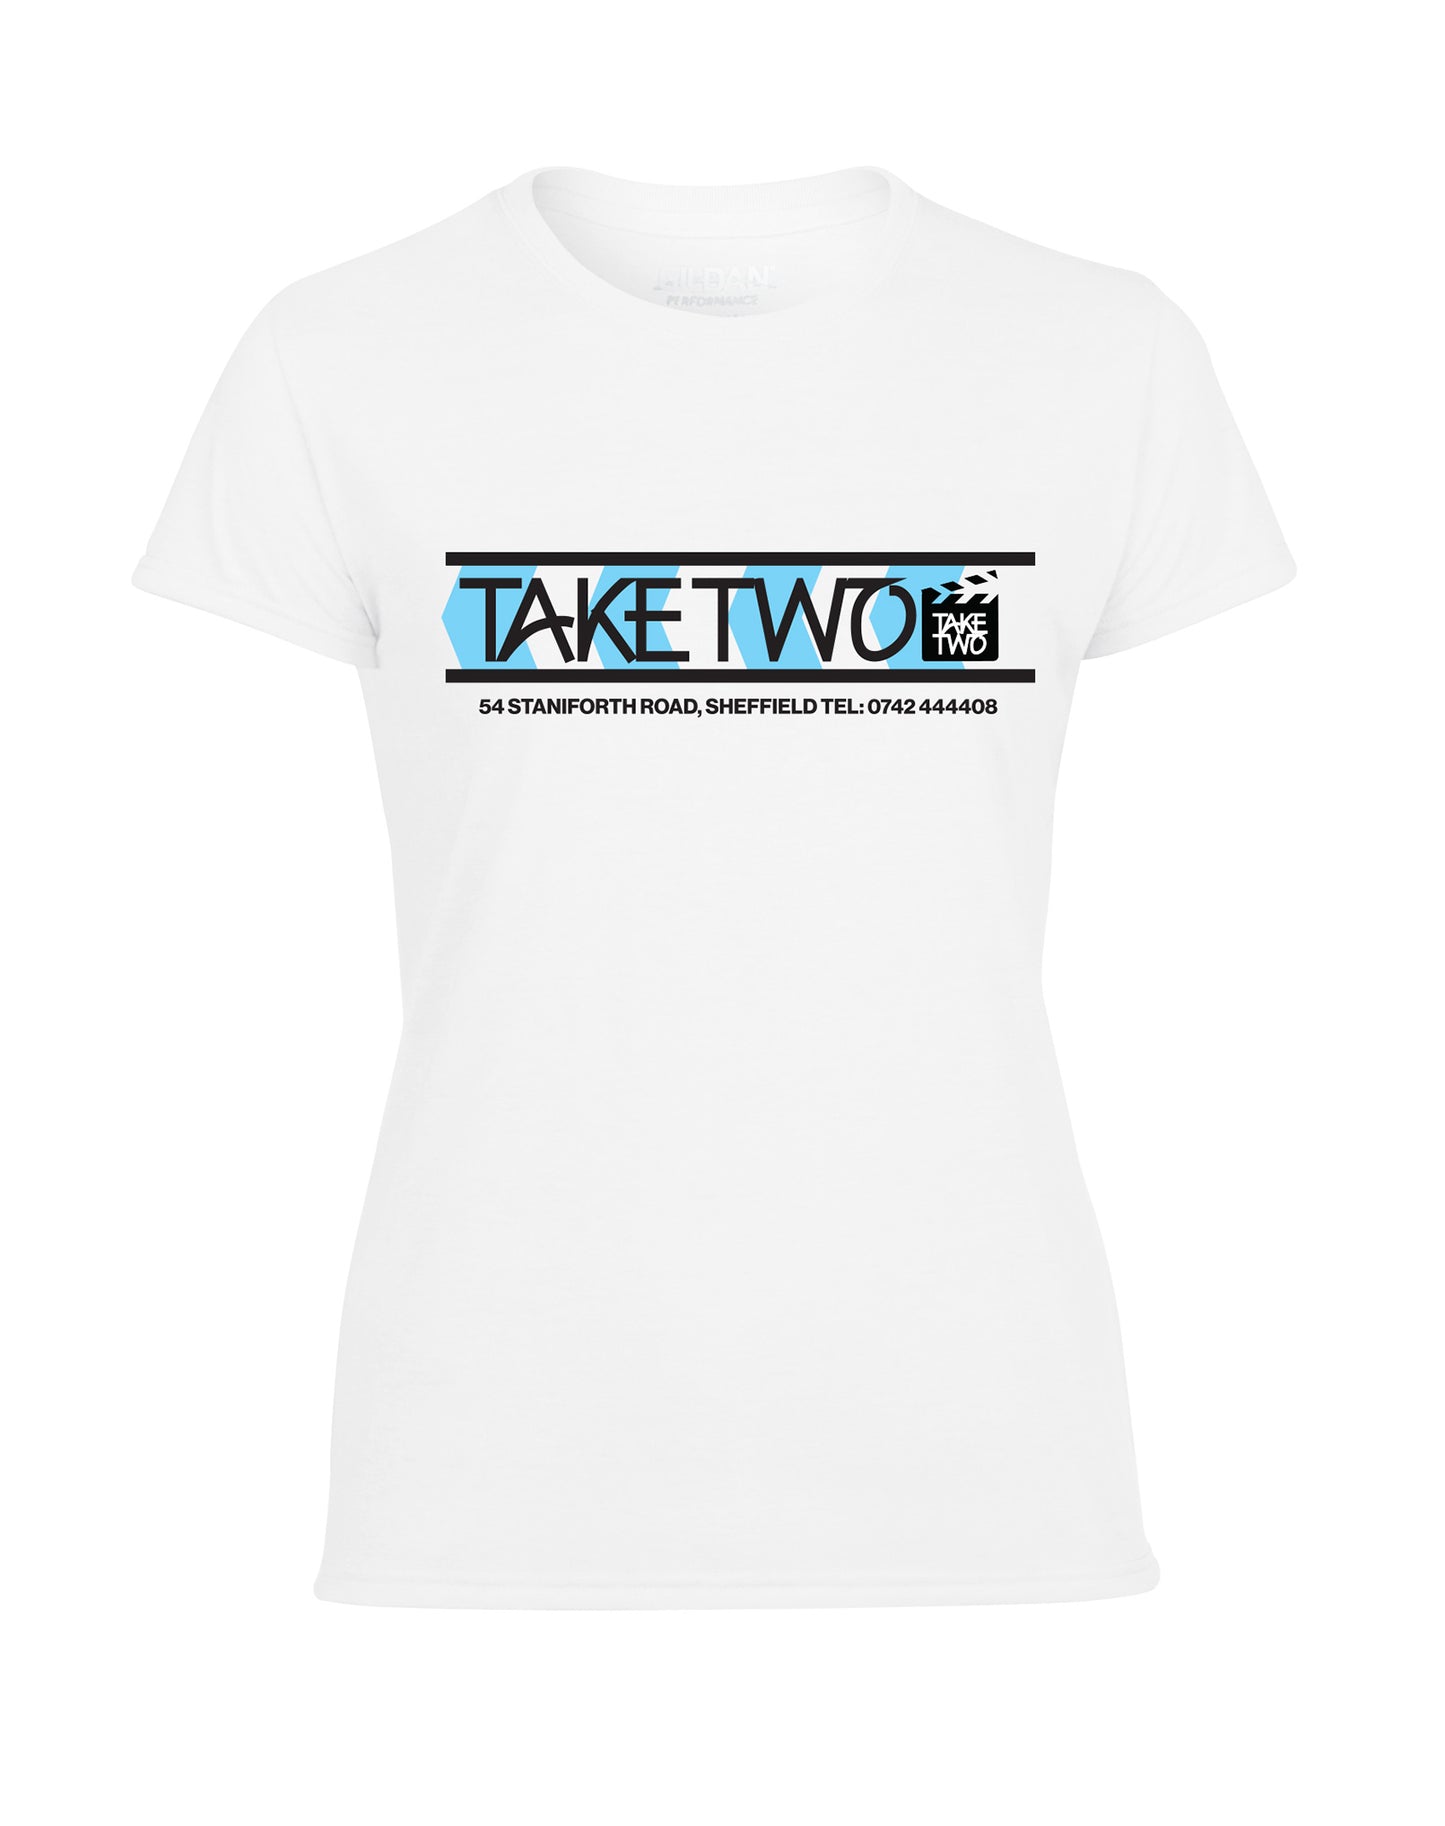 Take Two ladies fit t-shirt- various colours